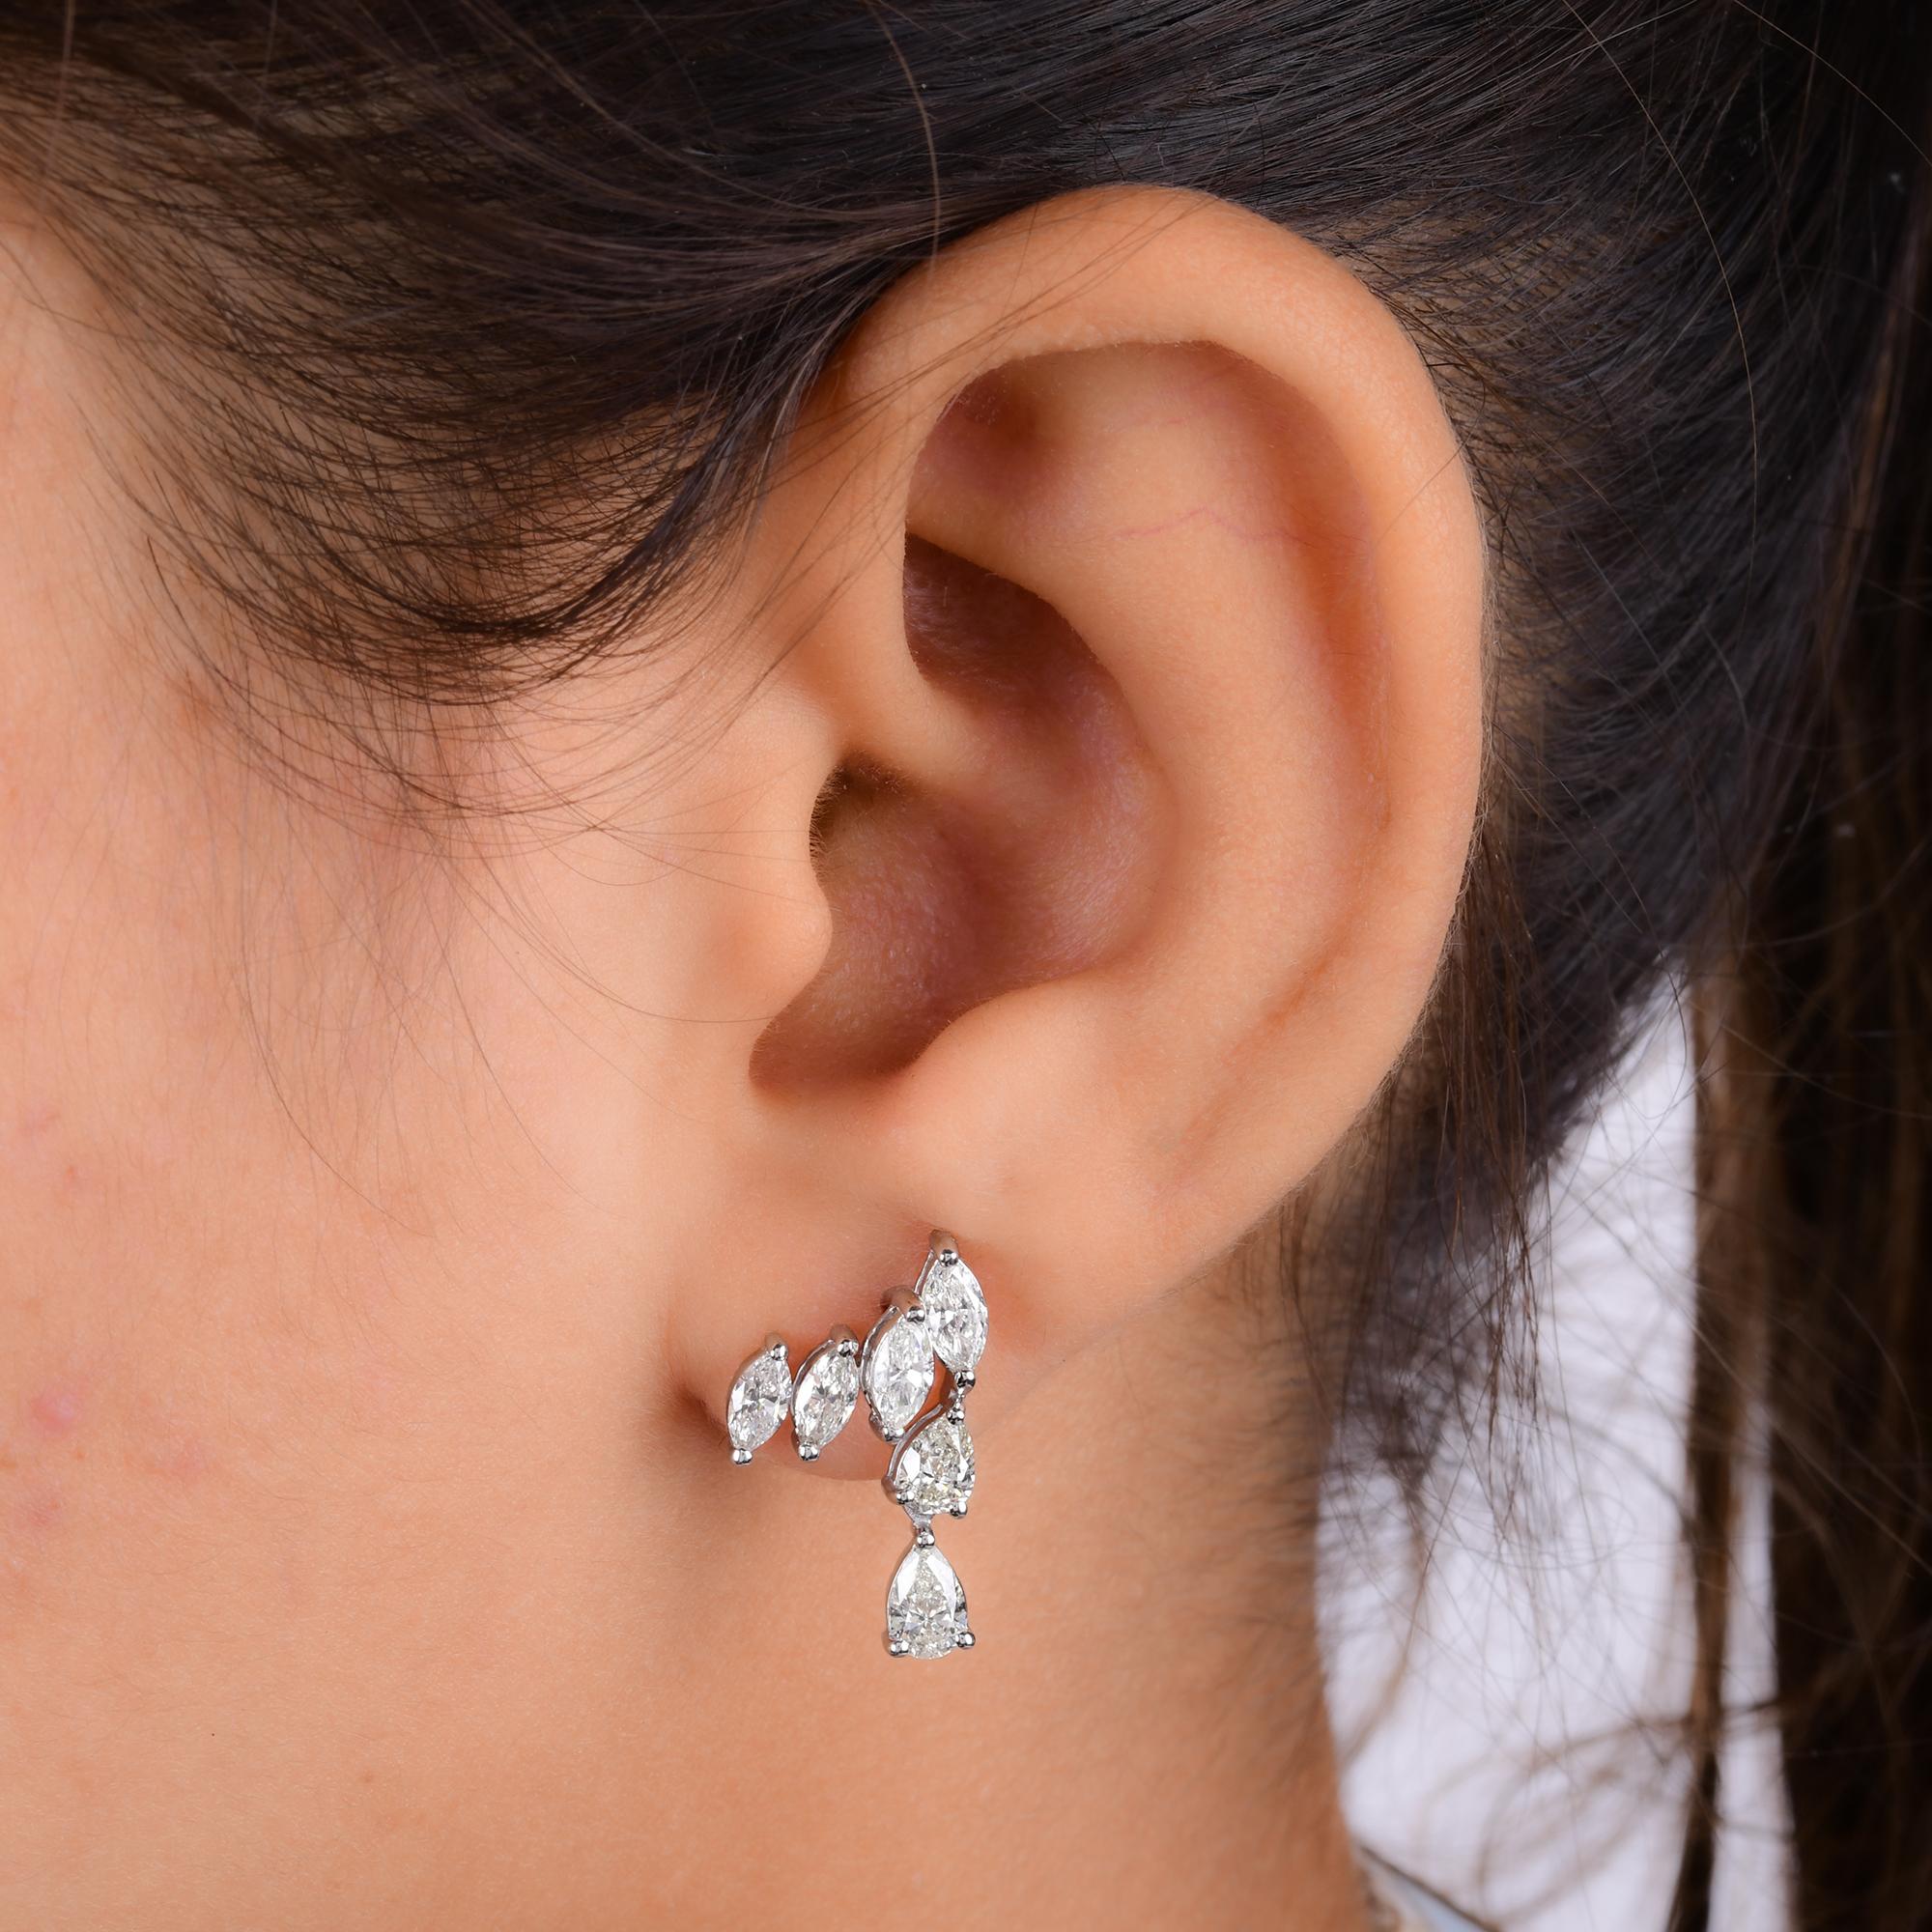 Modern Natural 2.26 Carat Pear & Marquise Diamond Earrings 14 Karat White Gold Jewelry For Sale